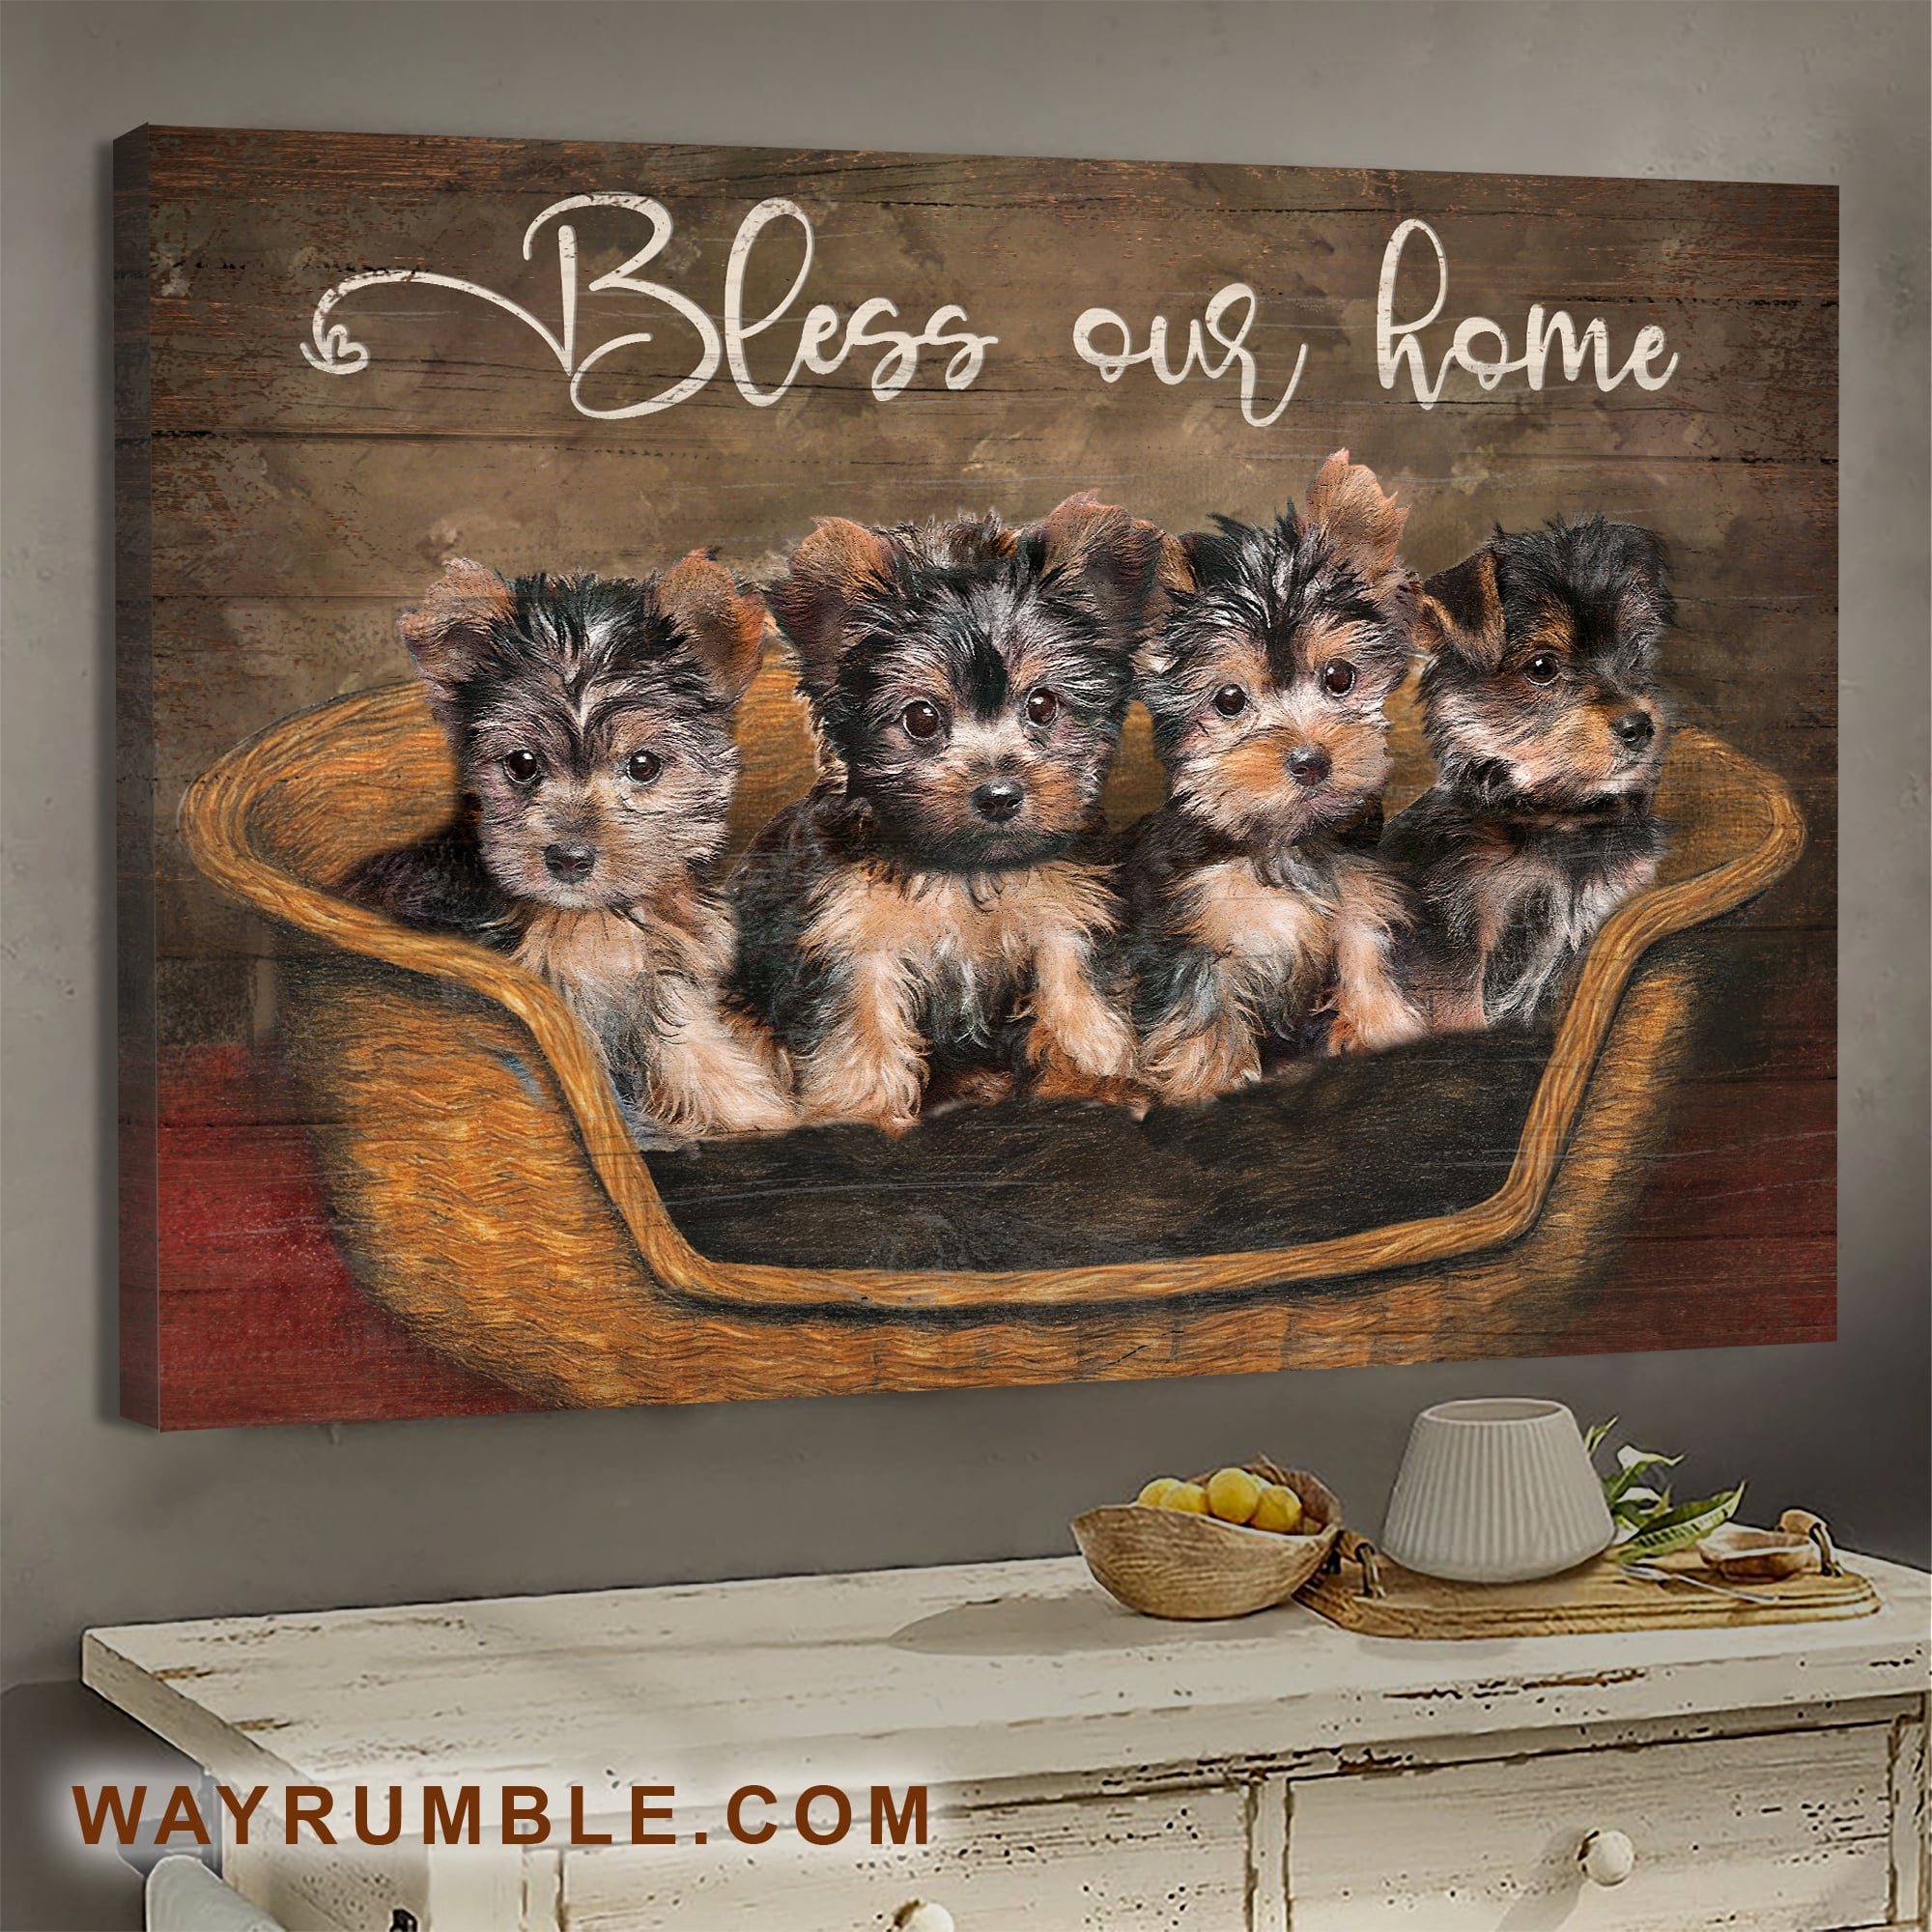 Little Yorkshire Terriers, Bless our home - Dogs Landscape Canvas Prints, Wall Art